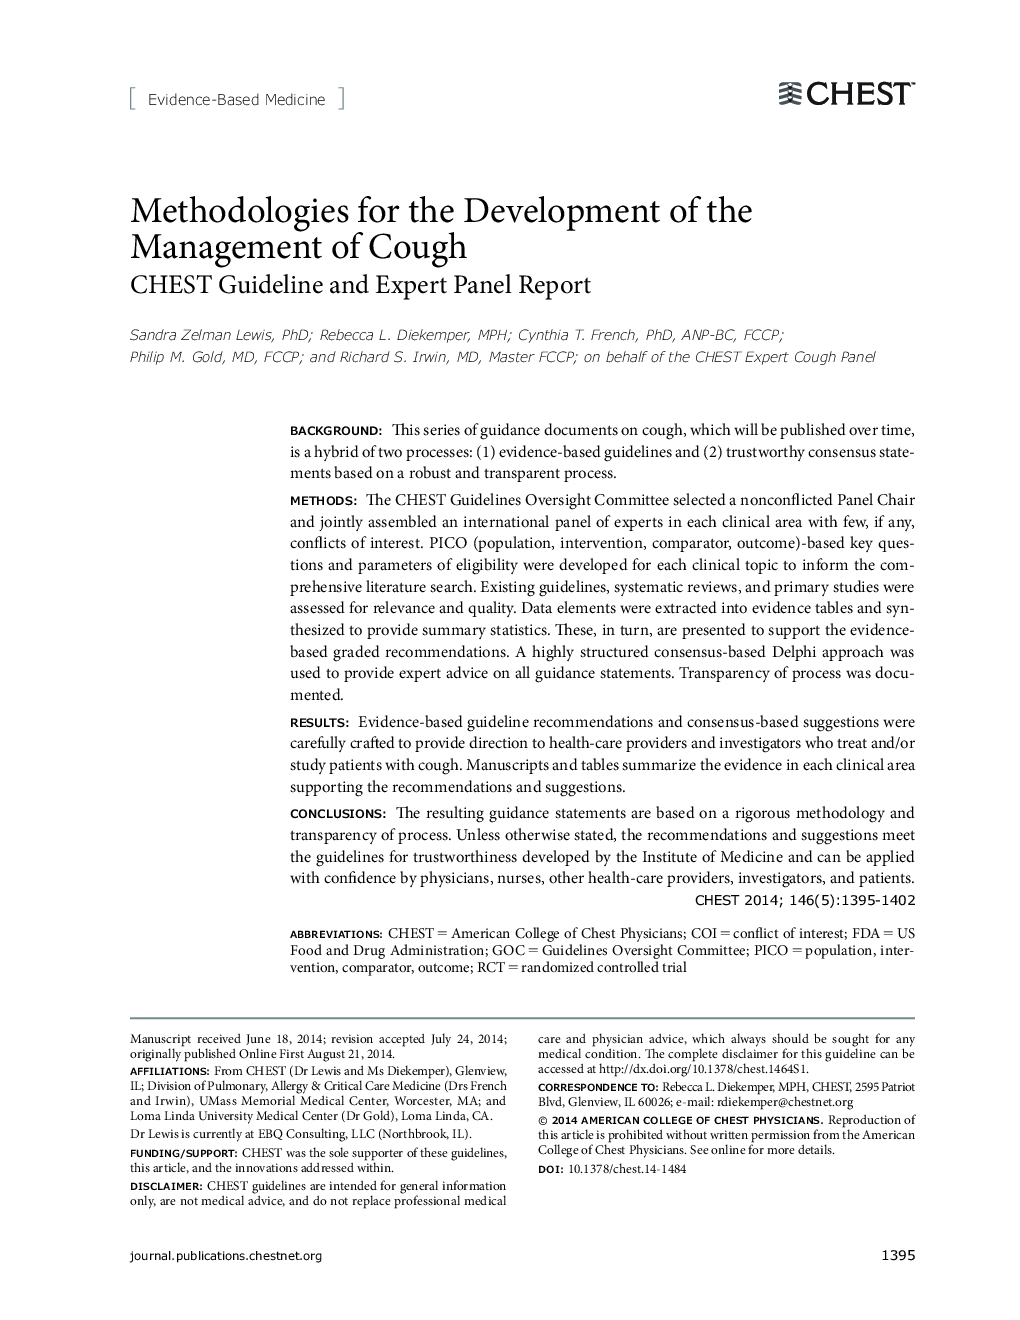 Methodologies for the Development of the Management of Cough